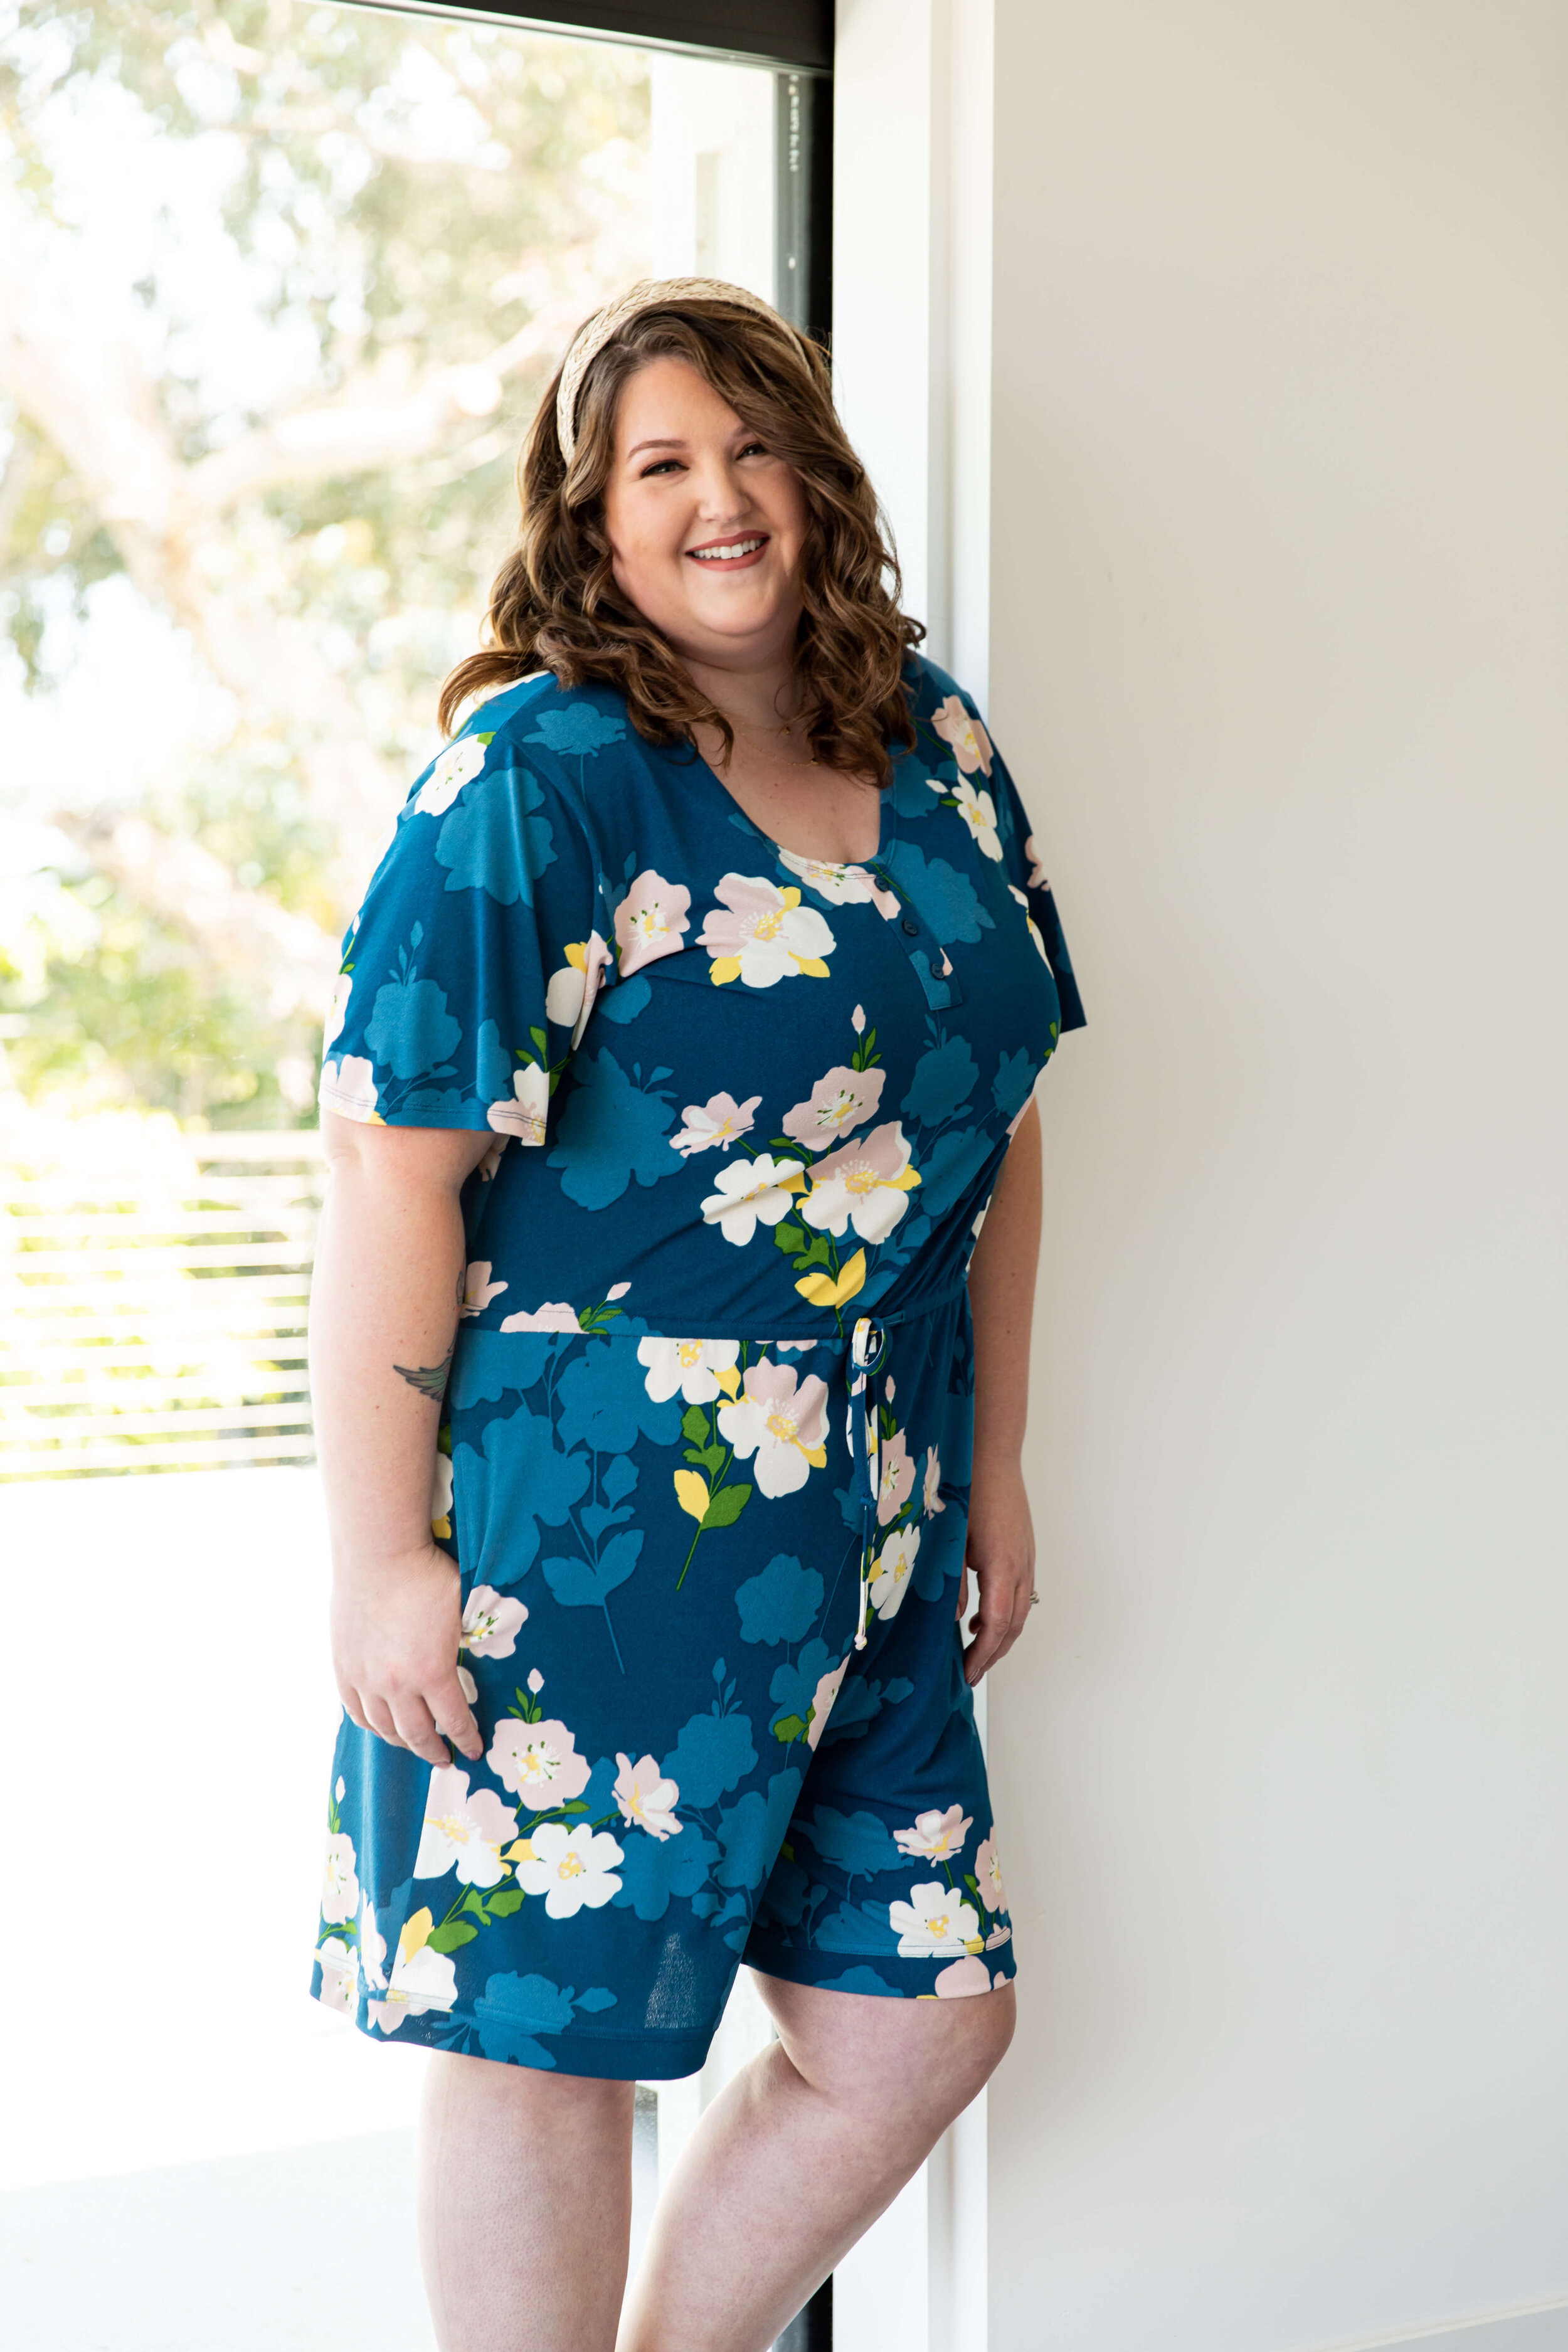 LuLaRoe Xanthe Sizing  Fit & feel of this new shorts romper, especially  for plus-size! 